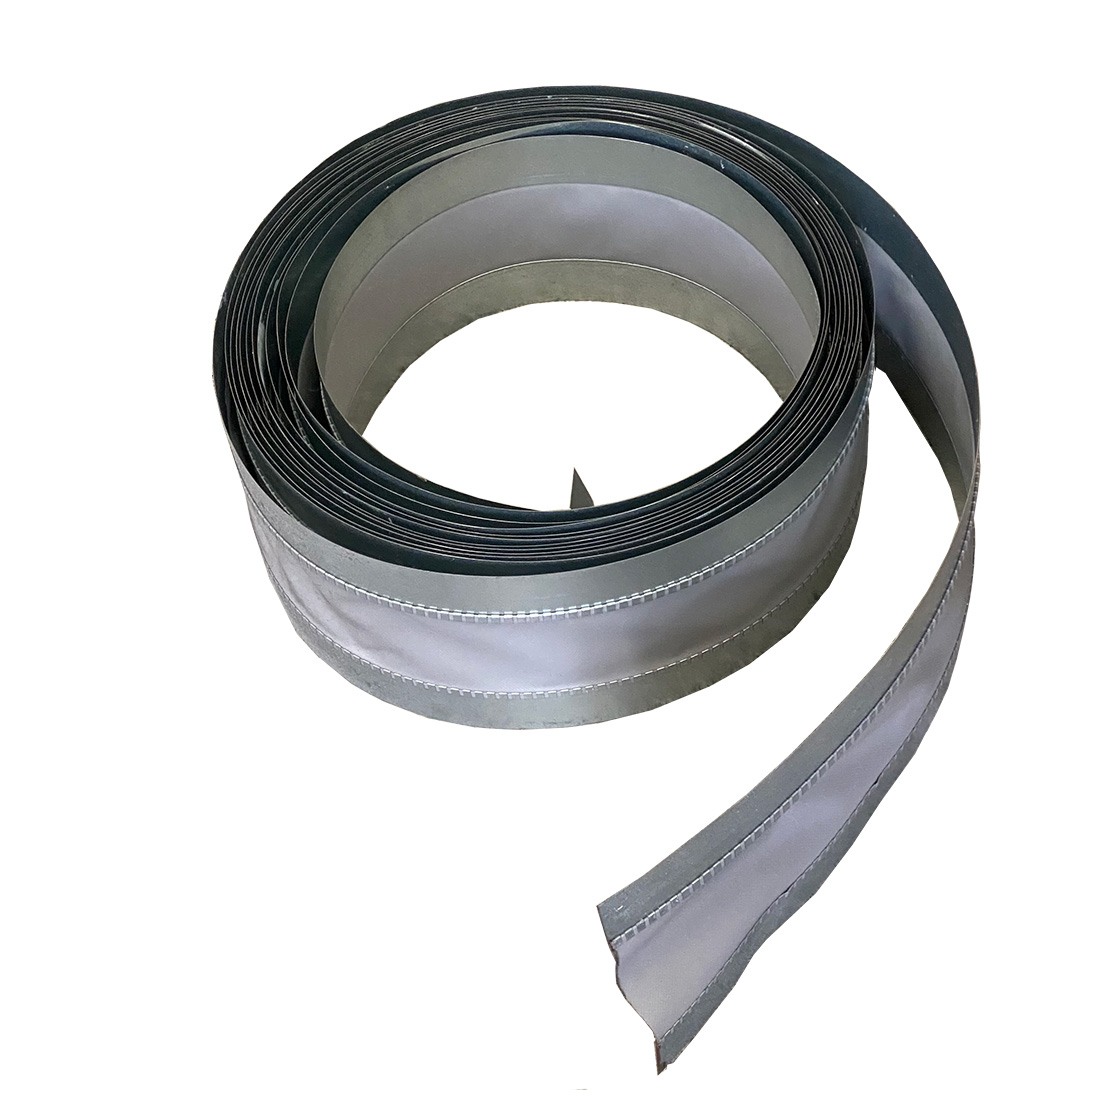 Special Offer - Full case of PVC coated Flexible duct Connector Band